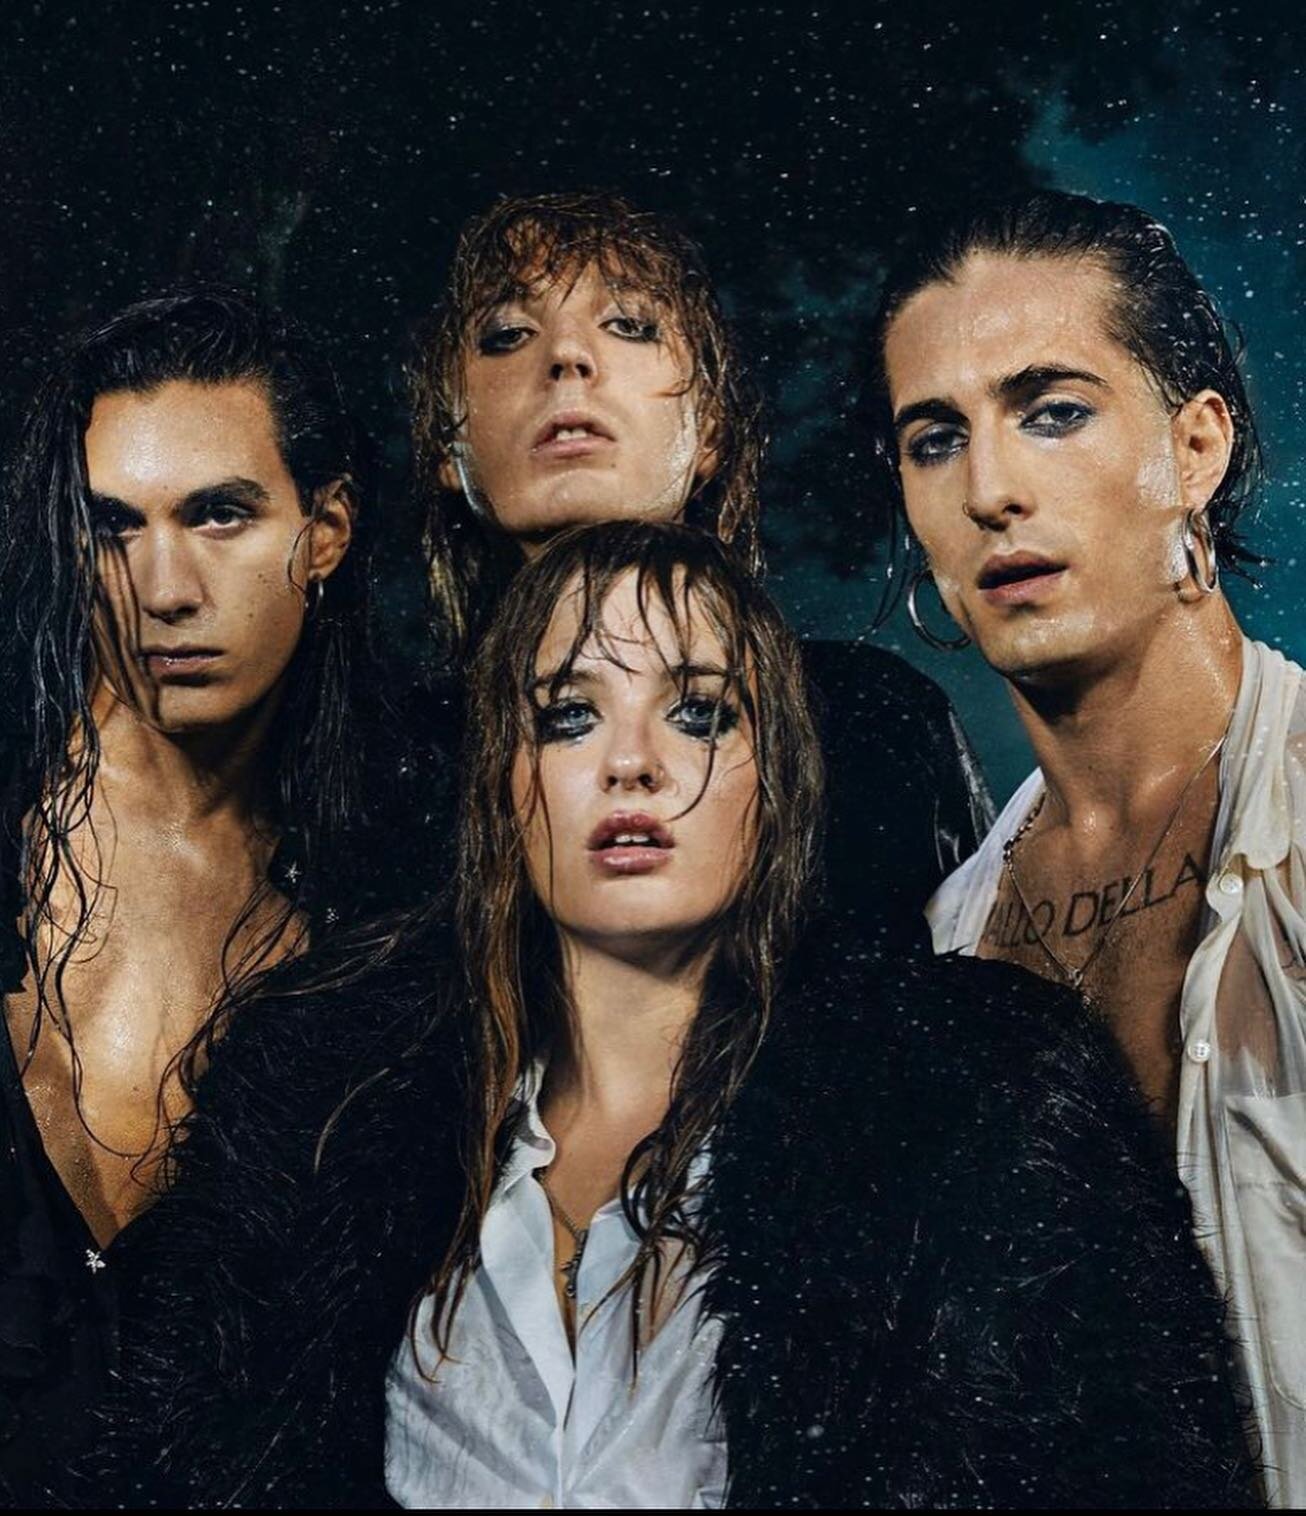 @maneskinofficial &ndash; &ldquo;The Loneliest&rdquo; is up 1 spot at #10 on Alternative radio this week. 

Check out which songs by @kennylattimore , @smashingpumpkins , and @stephensanchezofficial made breakthroughs to the top ten in their respecti